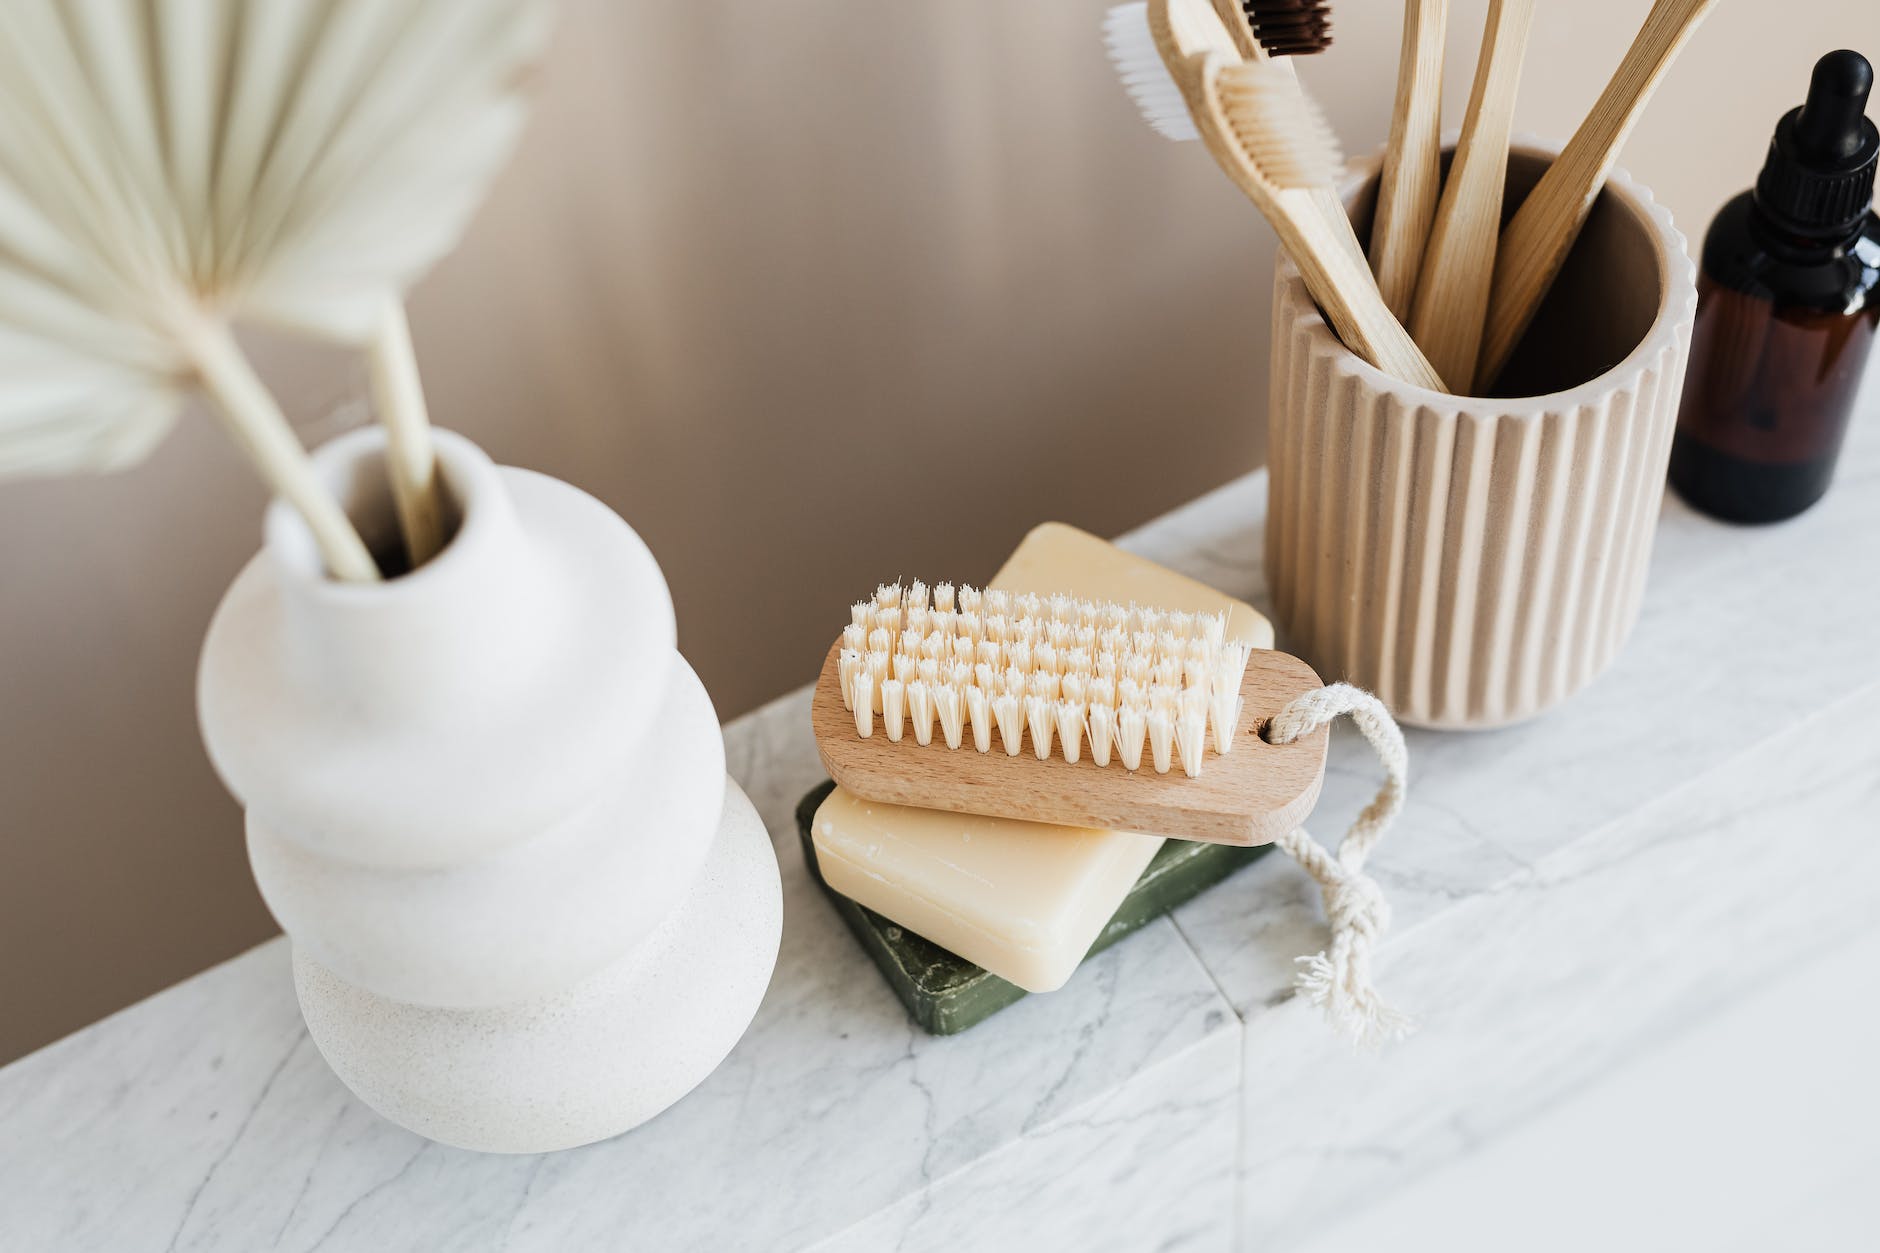 set of natural toiletries on marble tabletop